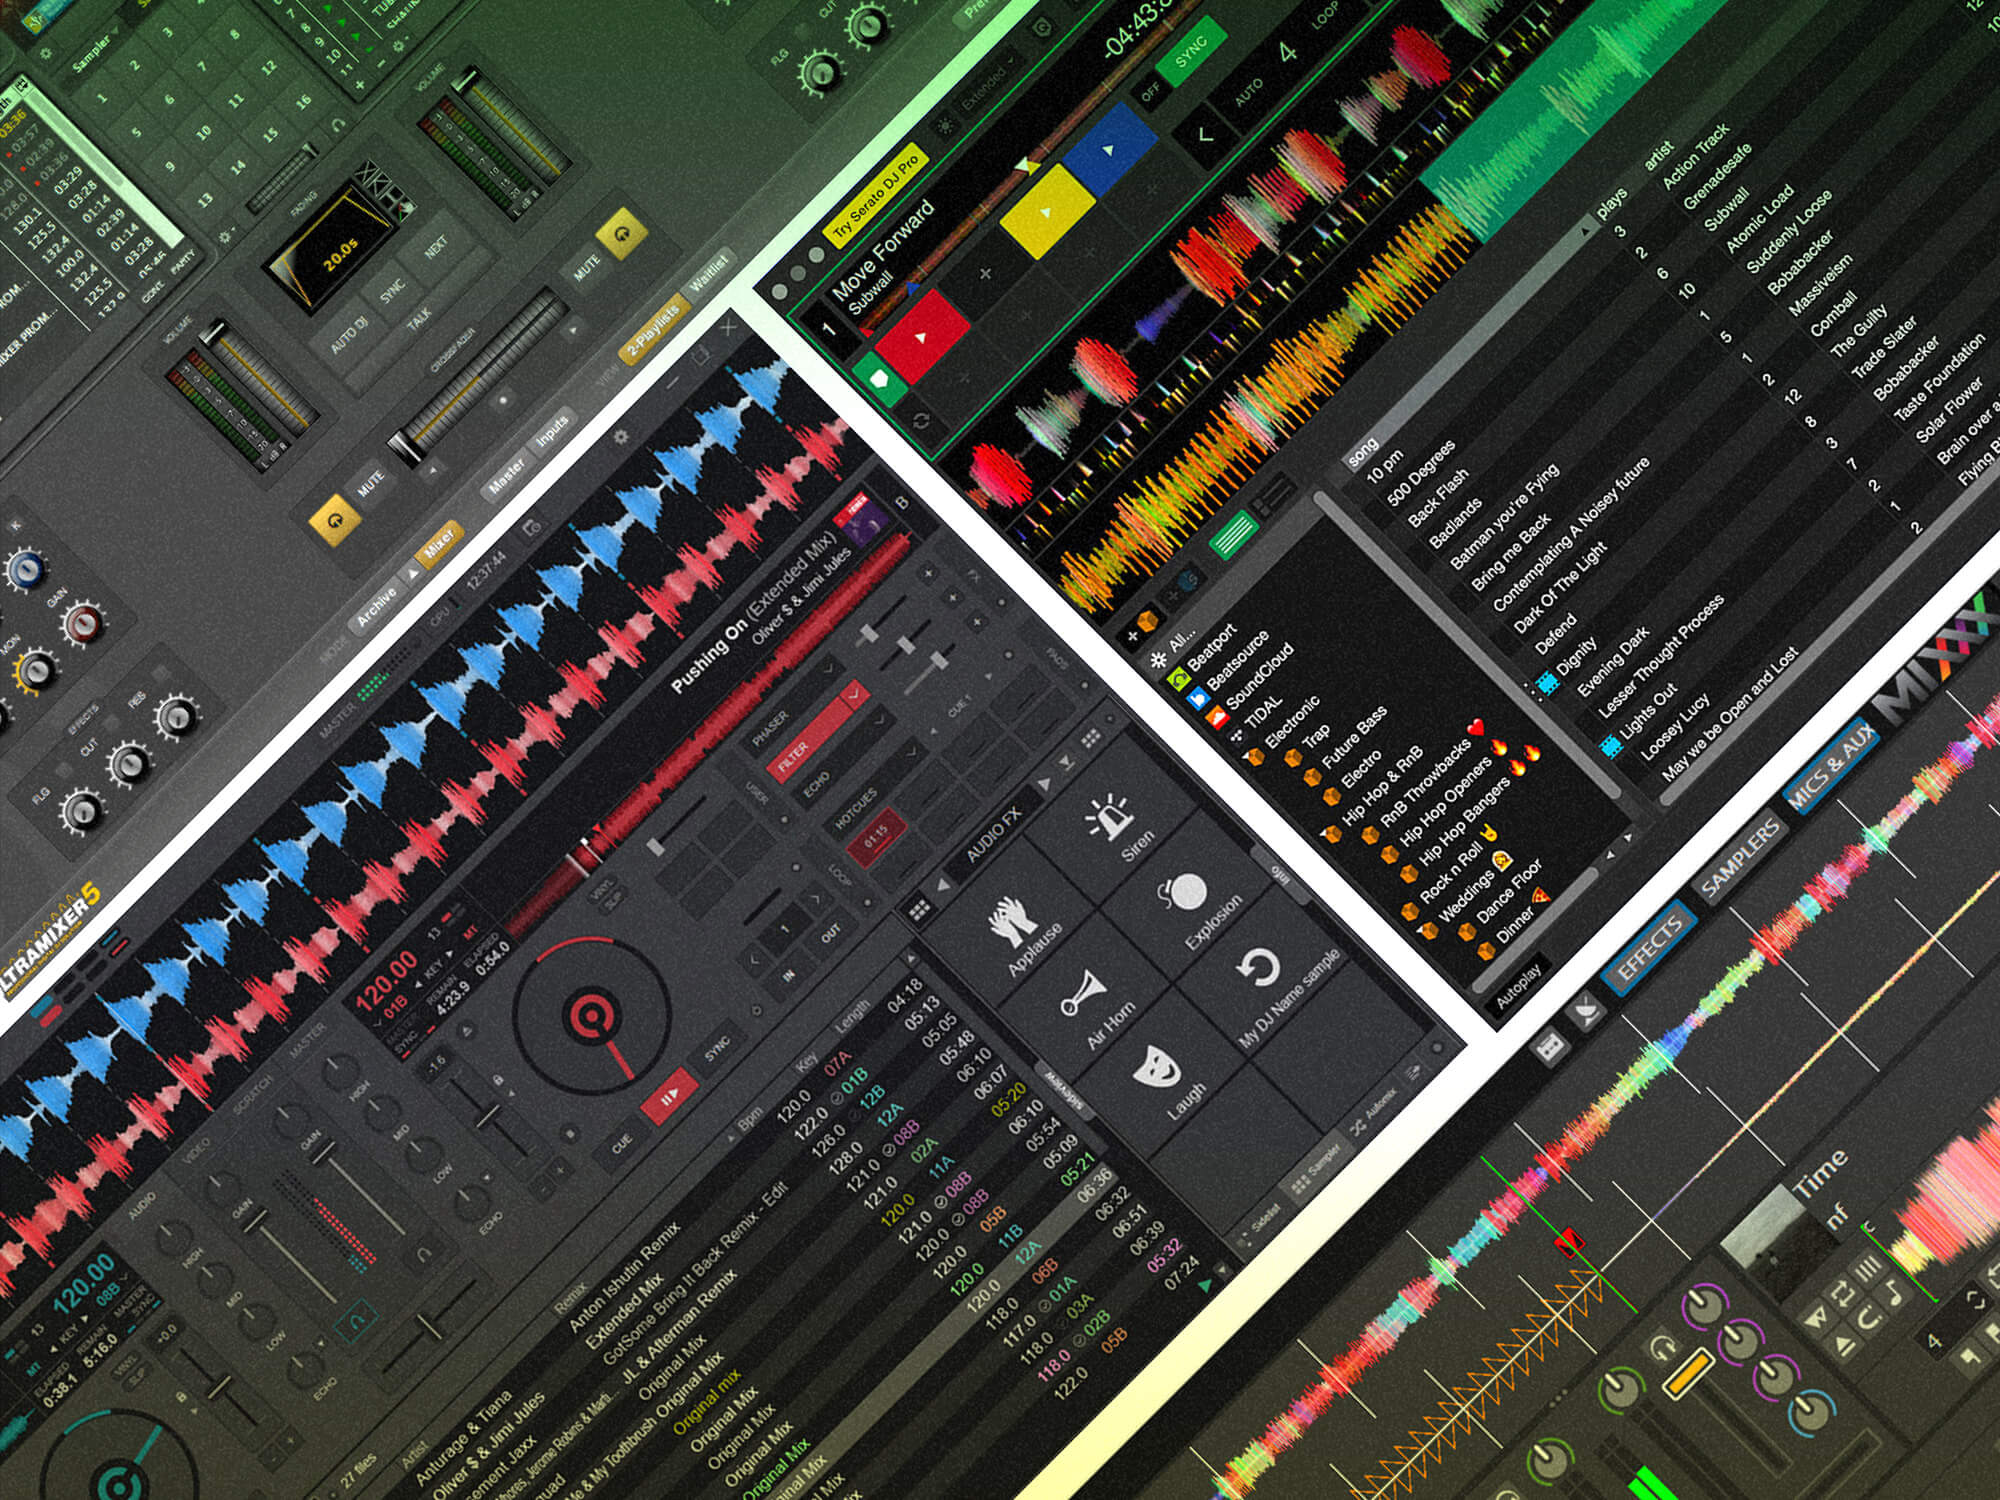 Best freeware plug-ins: Five of the best free software and apps for DJs |  MusicTech